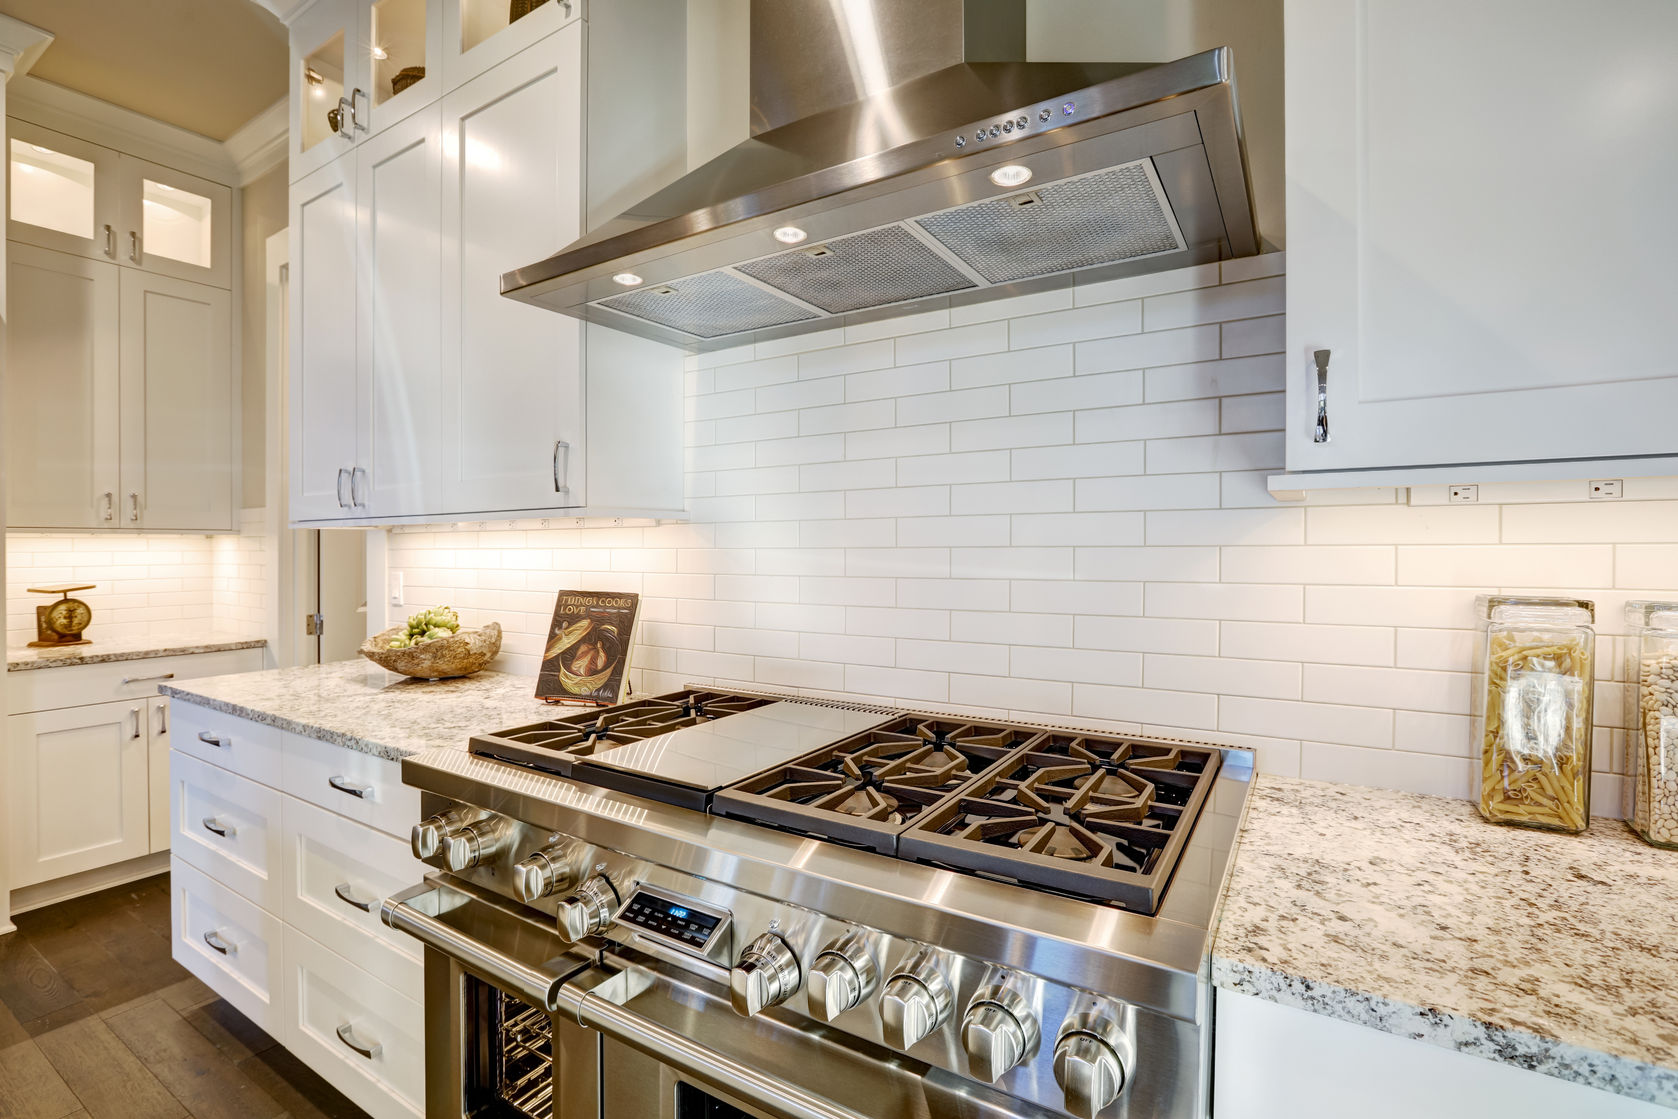 Can you put hot pans on granite countertops? - Kitchen Express NC